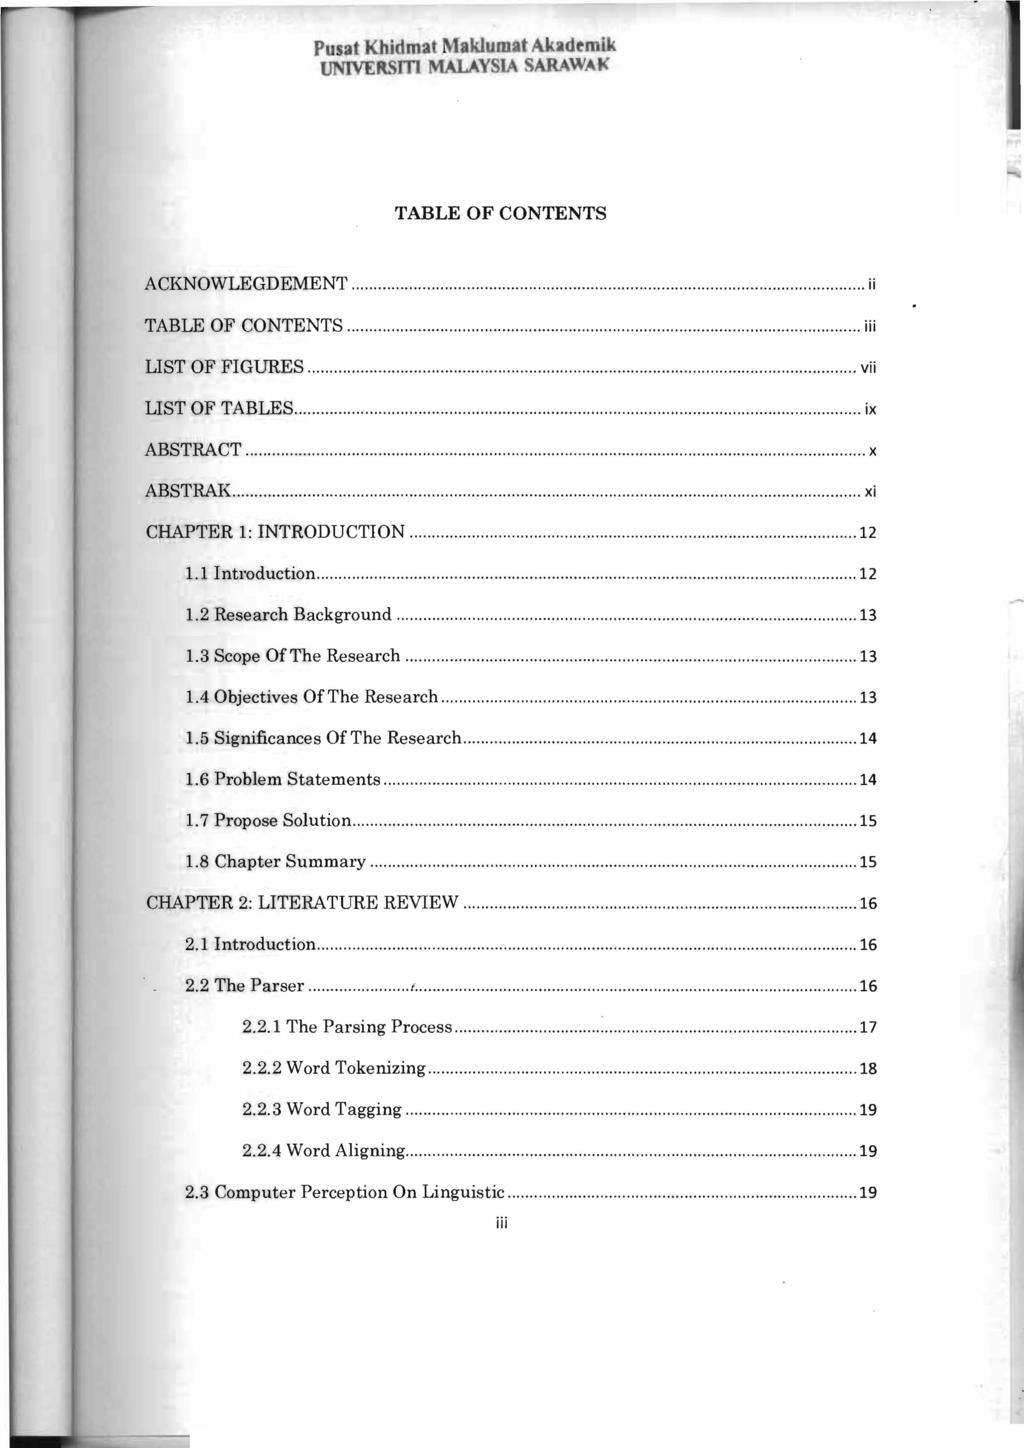 TABLE OF CONTENTS ACKNOWLEGDEMENT... ii TABLE OF CONTENTS... iii IJST OF FIGURES......... vii LIST OF TABLES... ix ABSTRACT...... x ABSTRAK...... xi CHAPTER 1: INTRODUCTION... 12 1.1 Introduction.